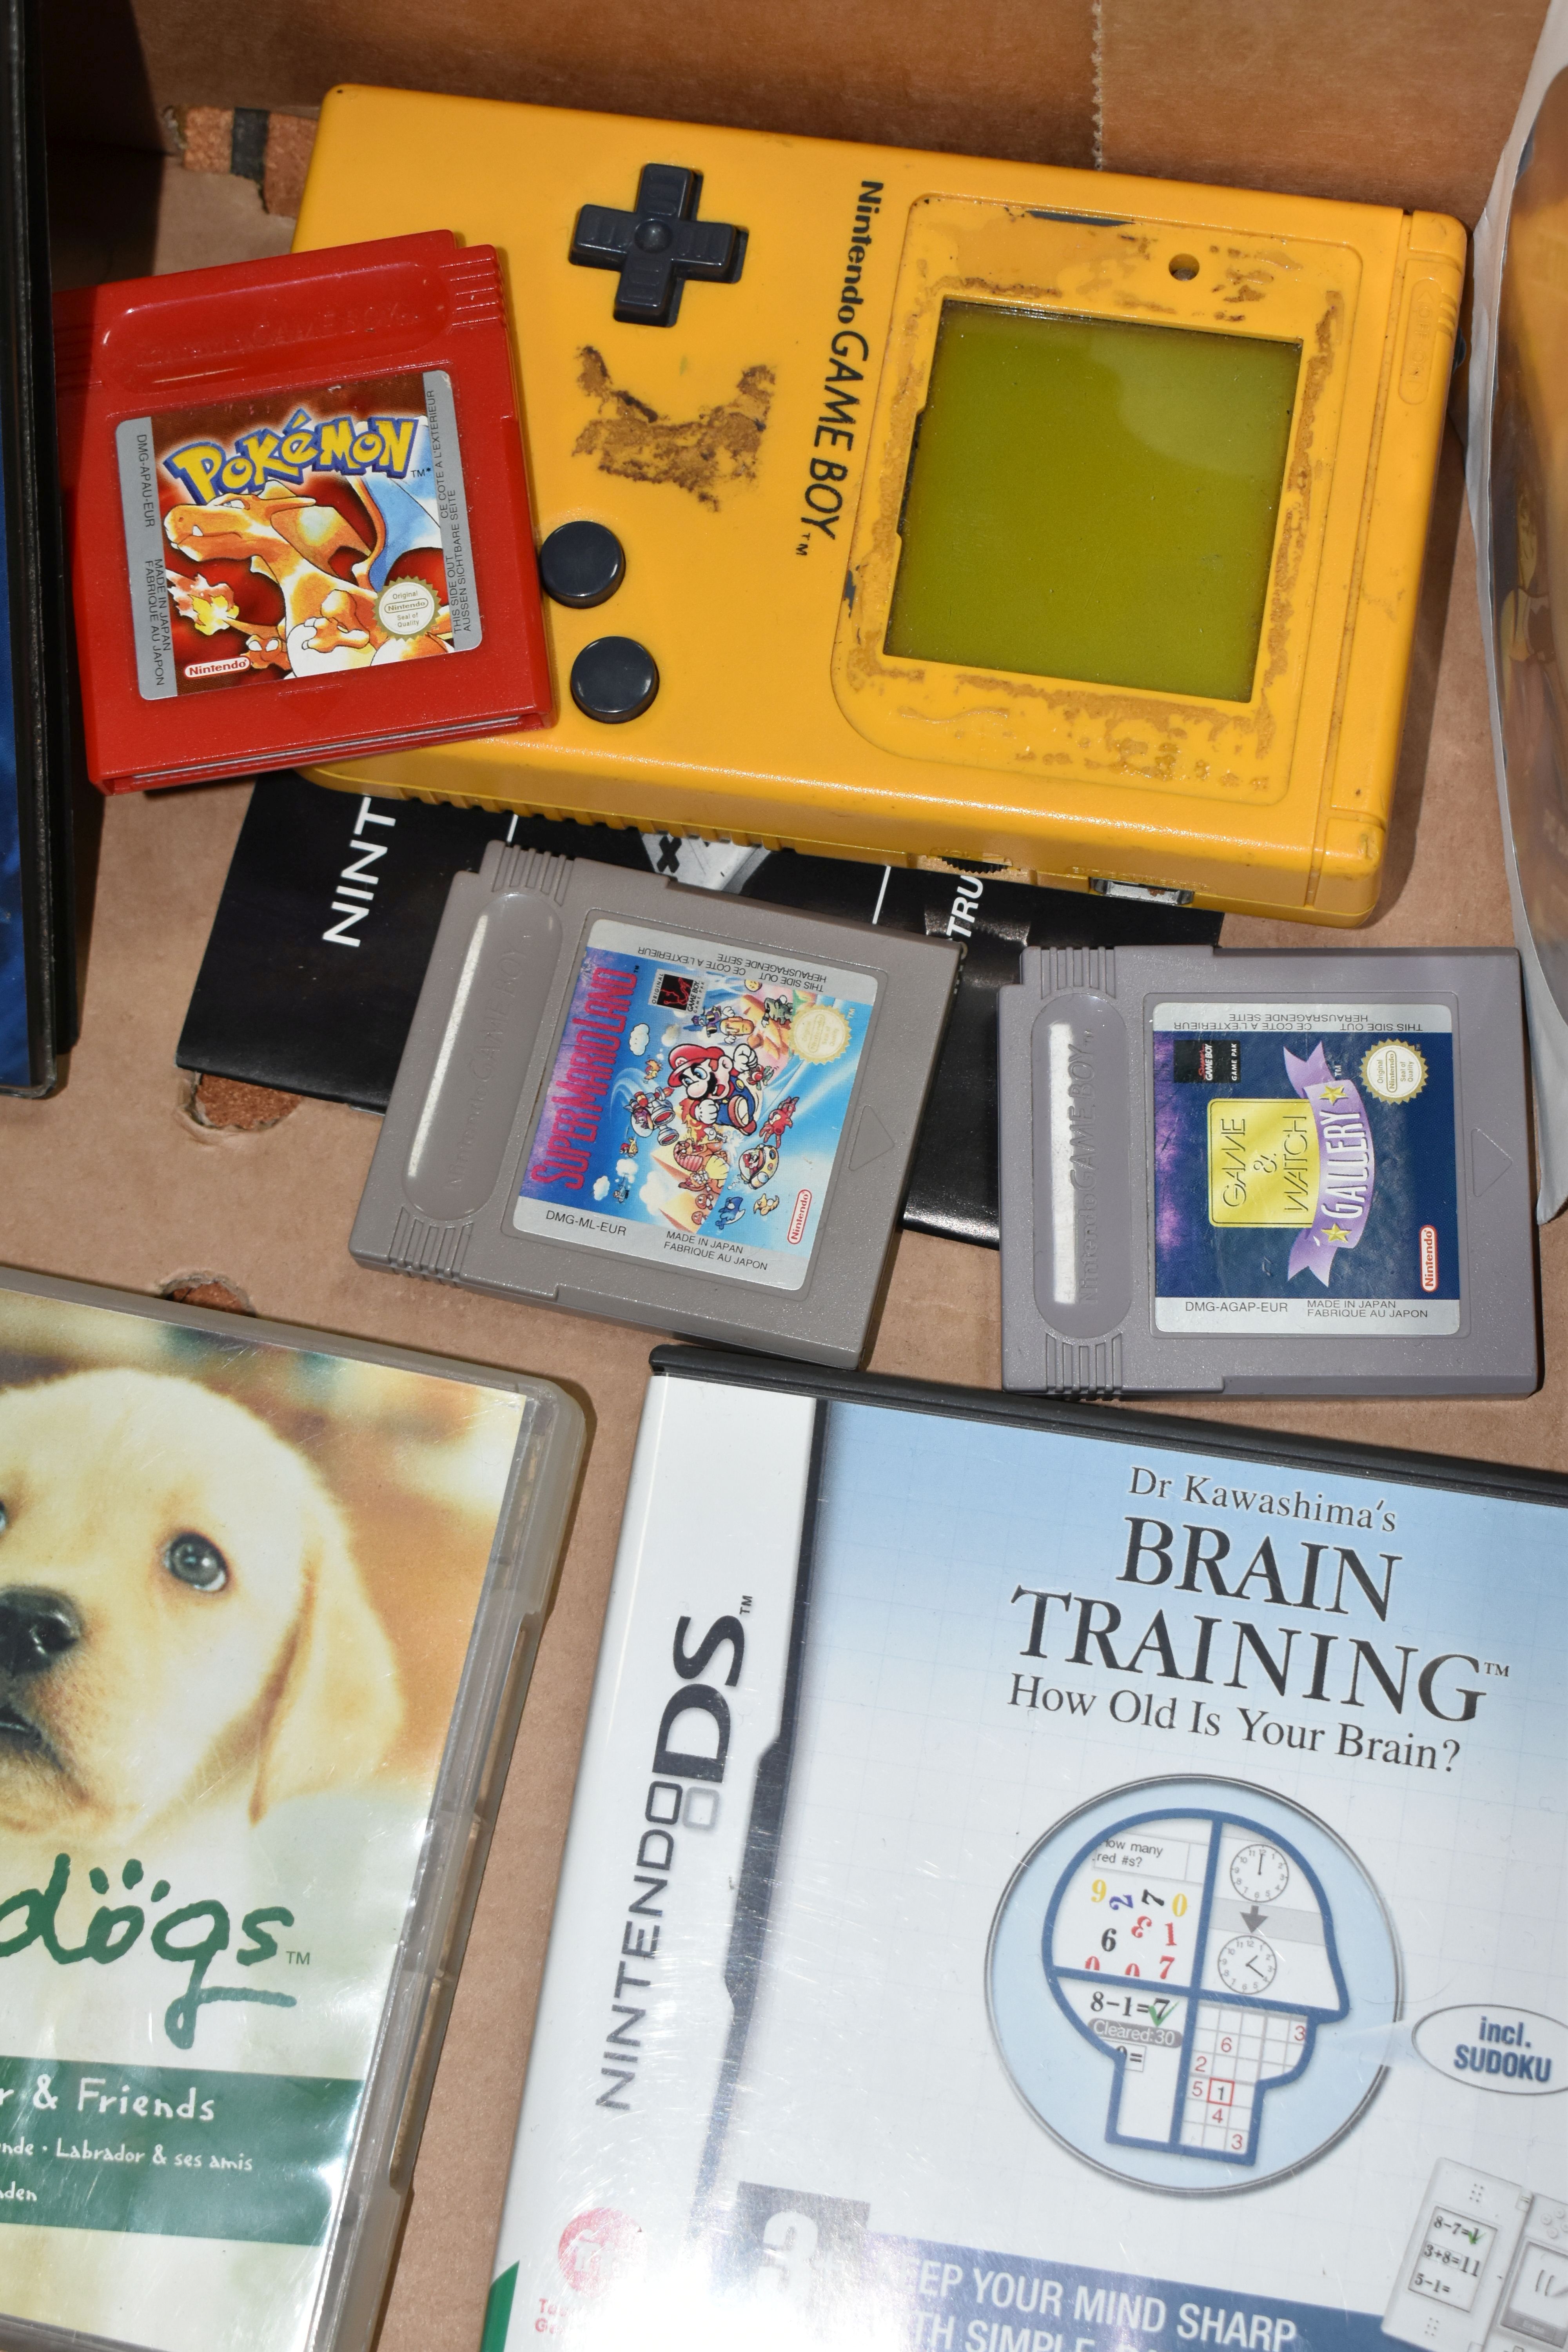 GAMEBOY ADVANCE SP, GAMEBOY, GAMES AND POKEMON CARDS, includes Monsters Inc, Super Mario Land, - Image 2 of 10